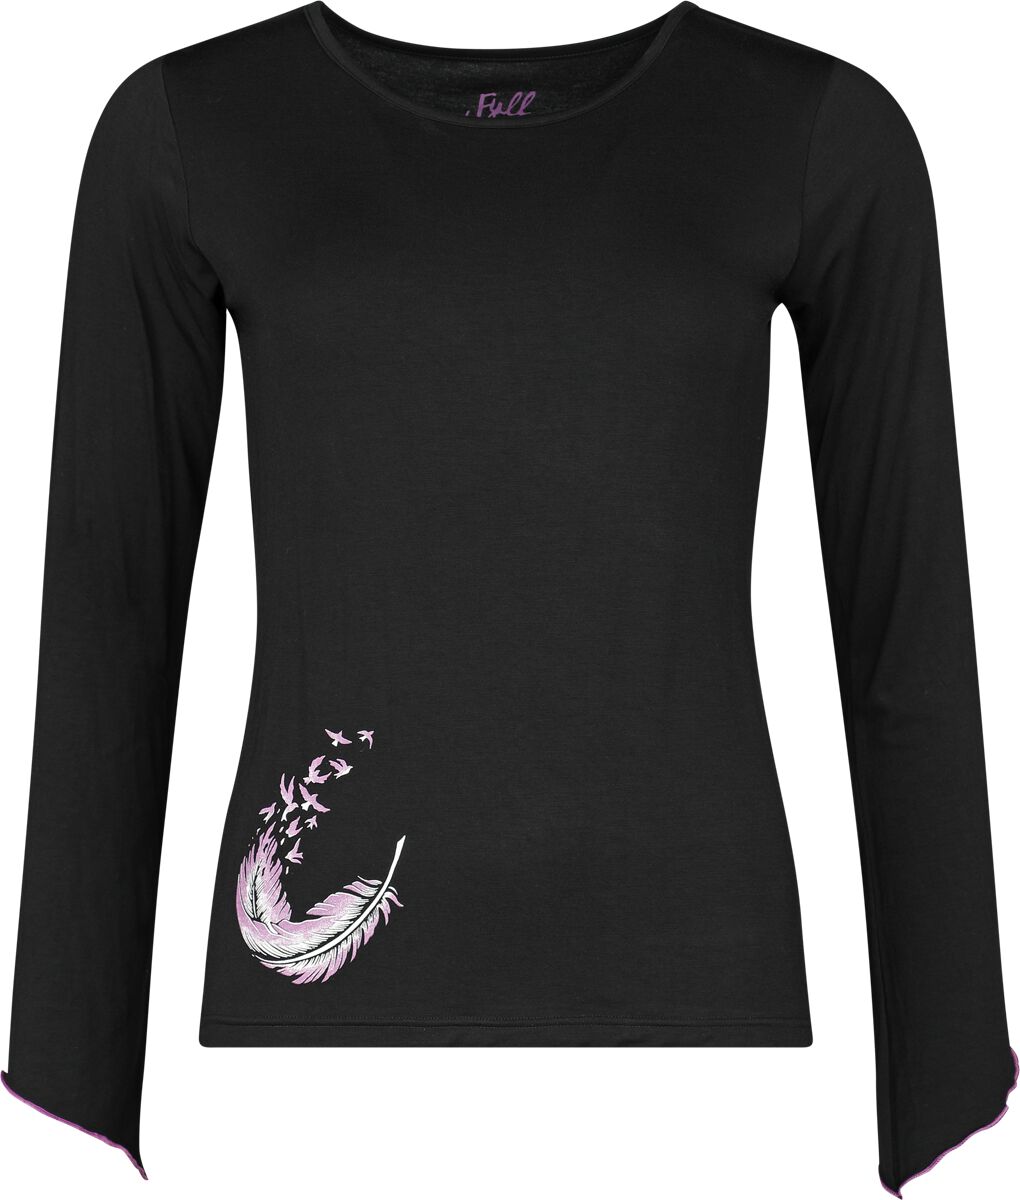 Full Volume by EMP - Longsleeve With Wing And Feather Print - Langarmshirt - schwarz - EMP Exklusiv!